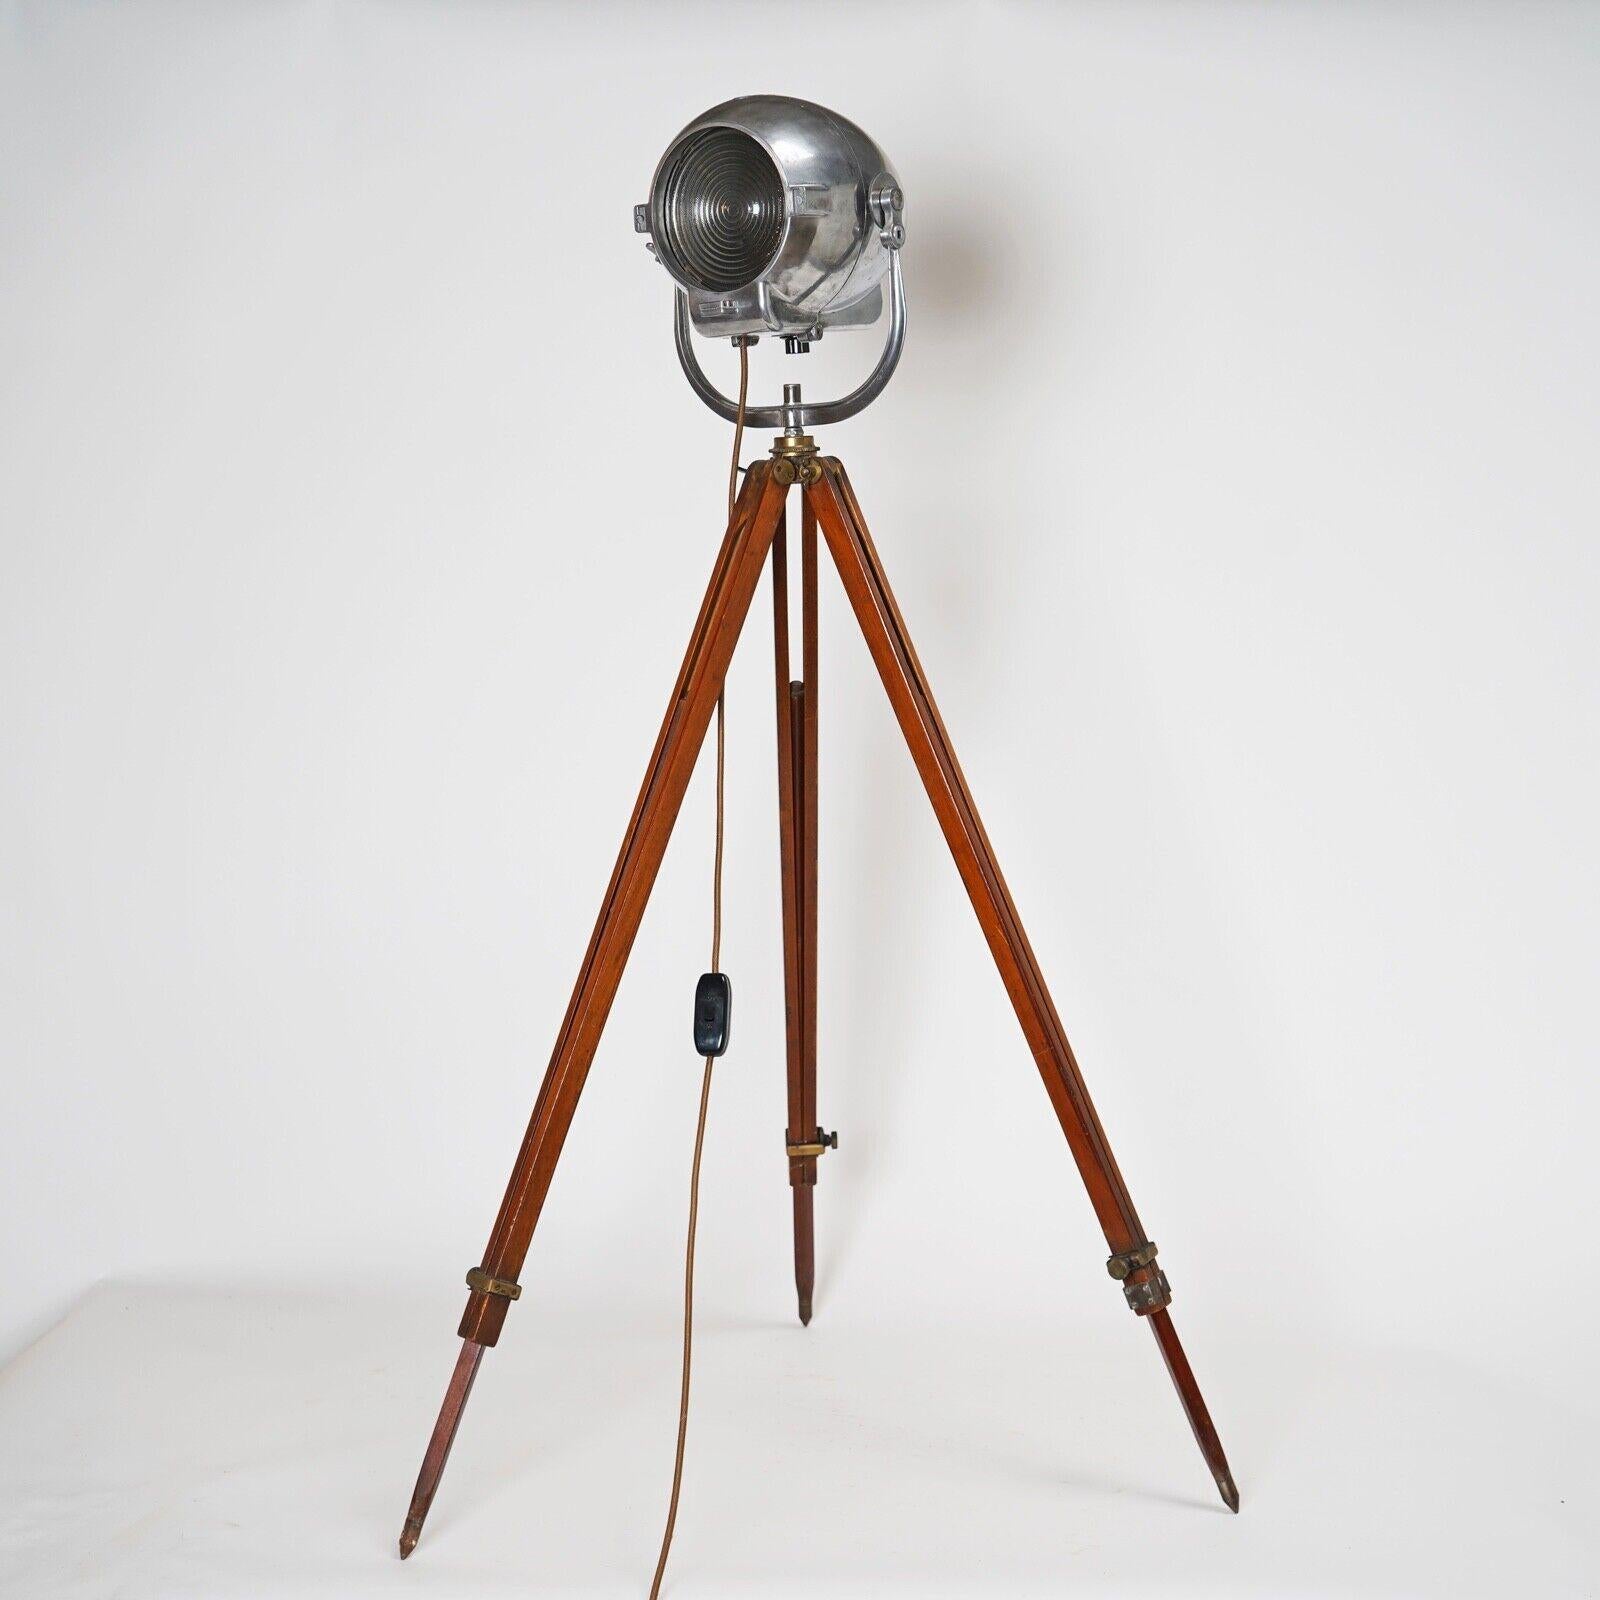 A superb Strand pattern 123 theatre light on quality antique adjustable wooden tripod.
Regarded as an industrial design classic.
Professionally polished. 

Condition 
Please do take a careful look at all our pictures and note that these are